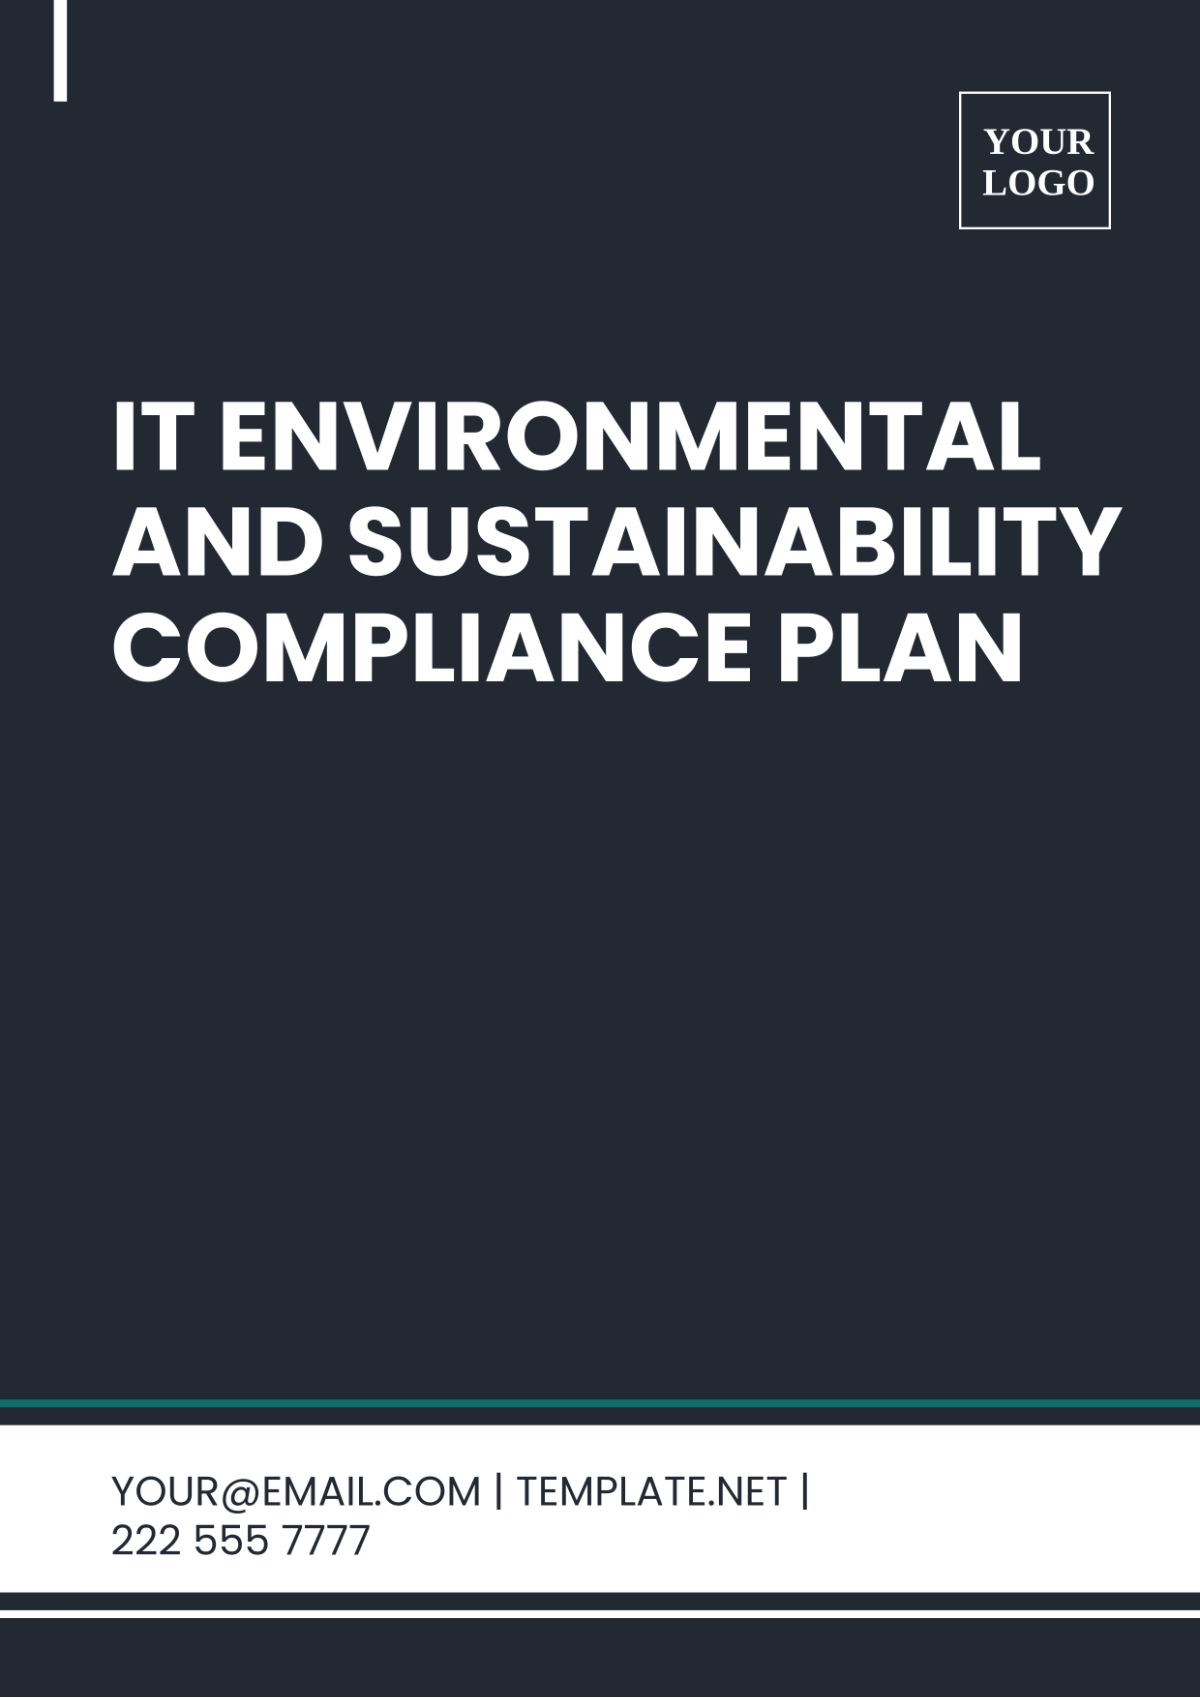 IT Environmental And Sustainability Compliance Plan Template